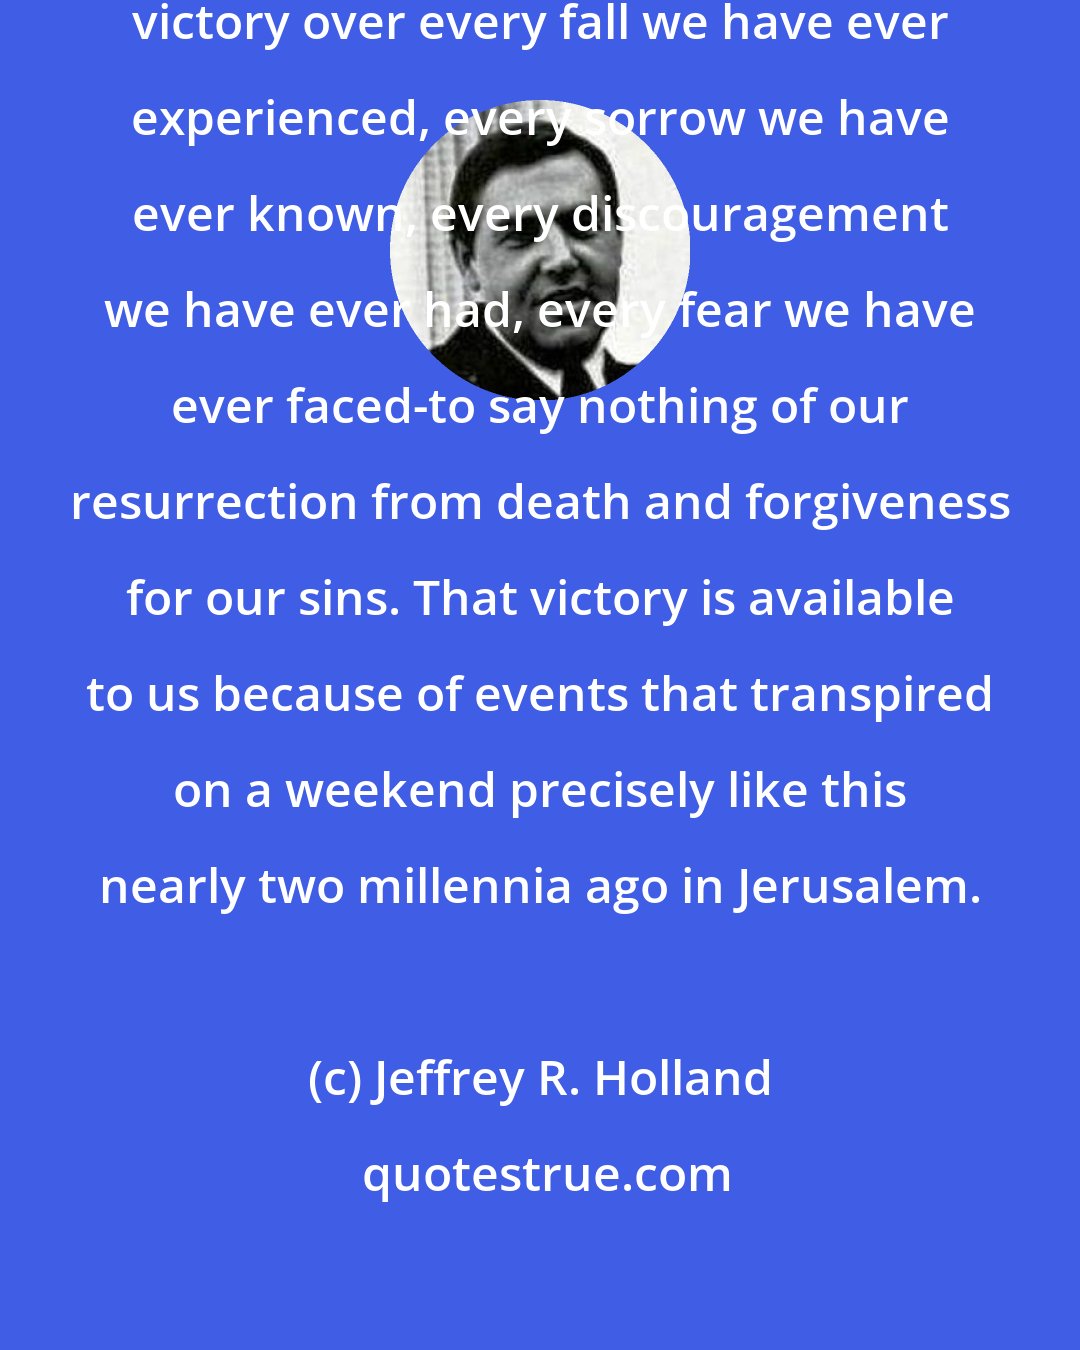 Jeffrey R. Holland: So today we celebrate the gift of victory over every fall we have ever experienced, every sorrow we have ever known, every discouragement we have ever had, every fear we have ever faced-to say nothing of our resurrection from death and forgiveness for our sins. That victory is available to us because of events that transpired on a weekend precisely like this nearly two millennia ago in Jerusalem.